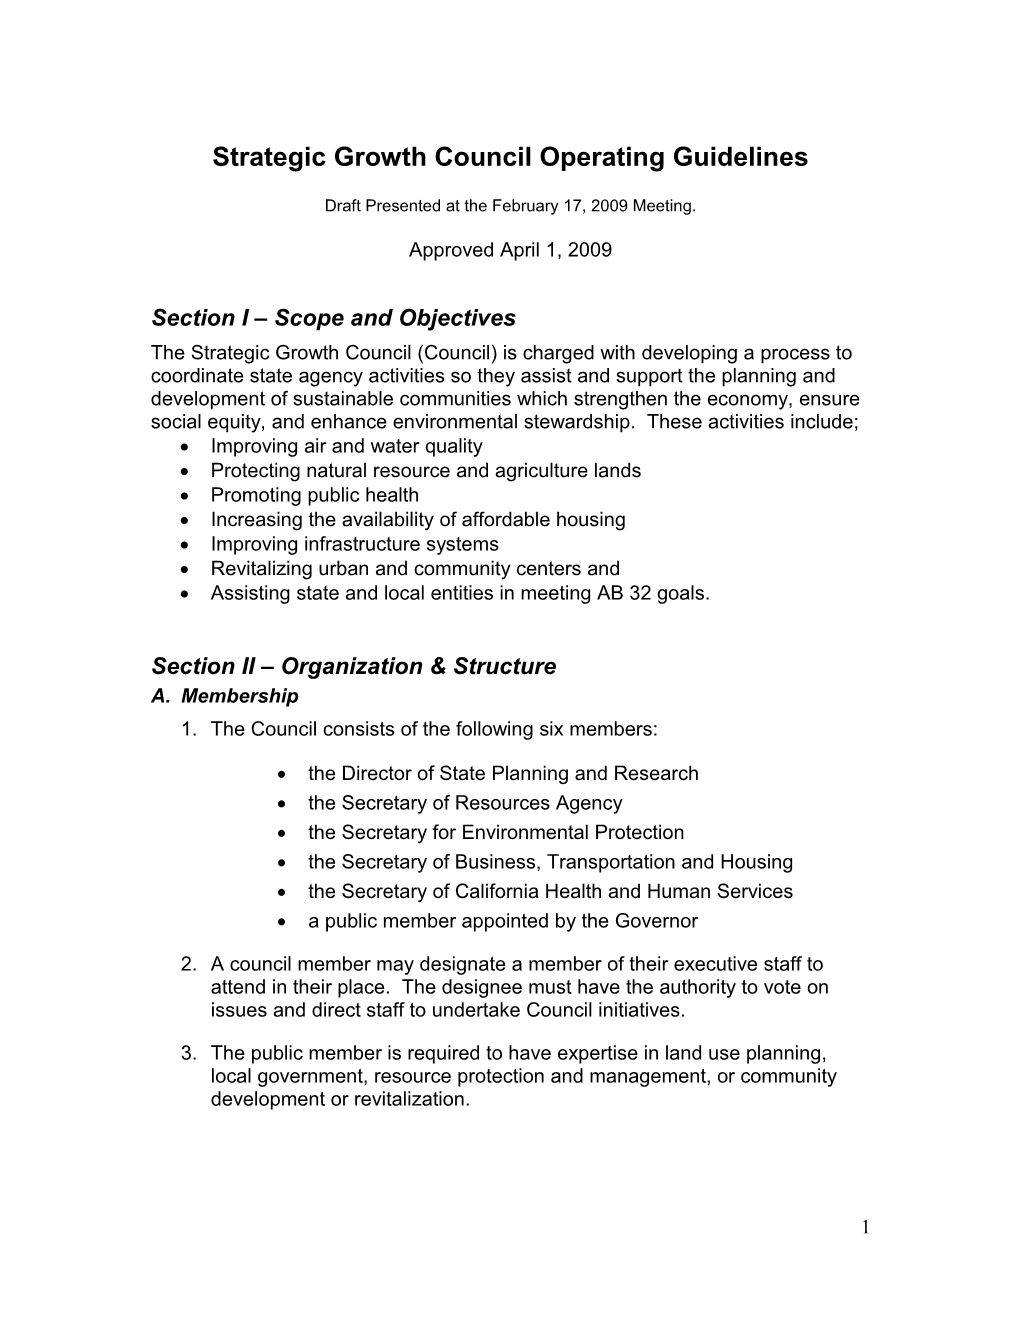 Strategic Growth Council Temporary Operating Guidelines